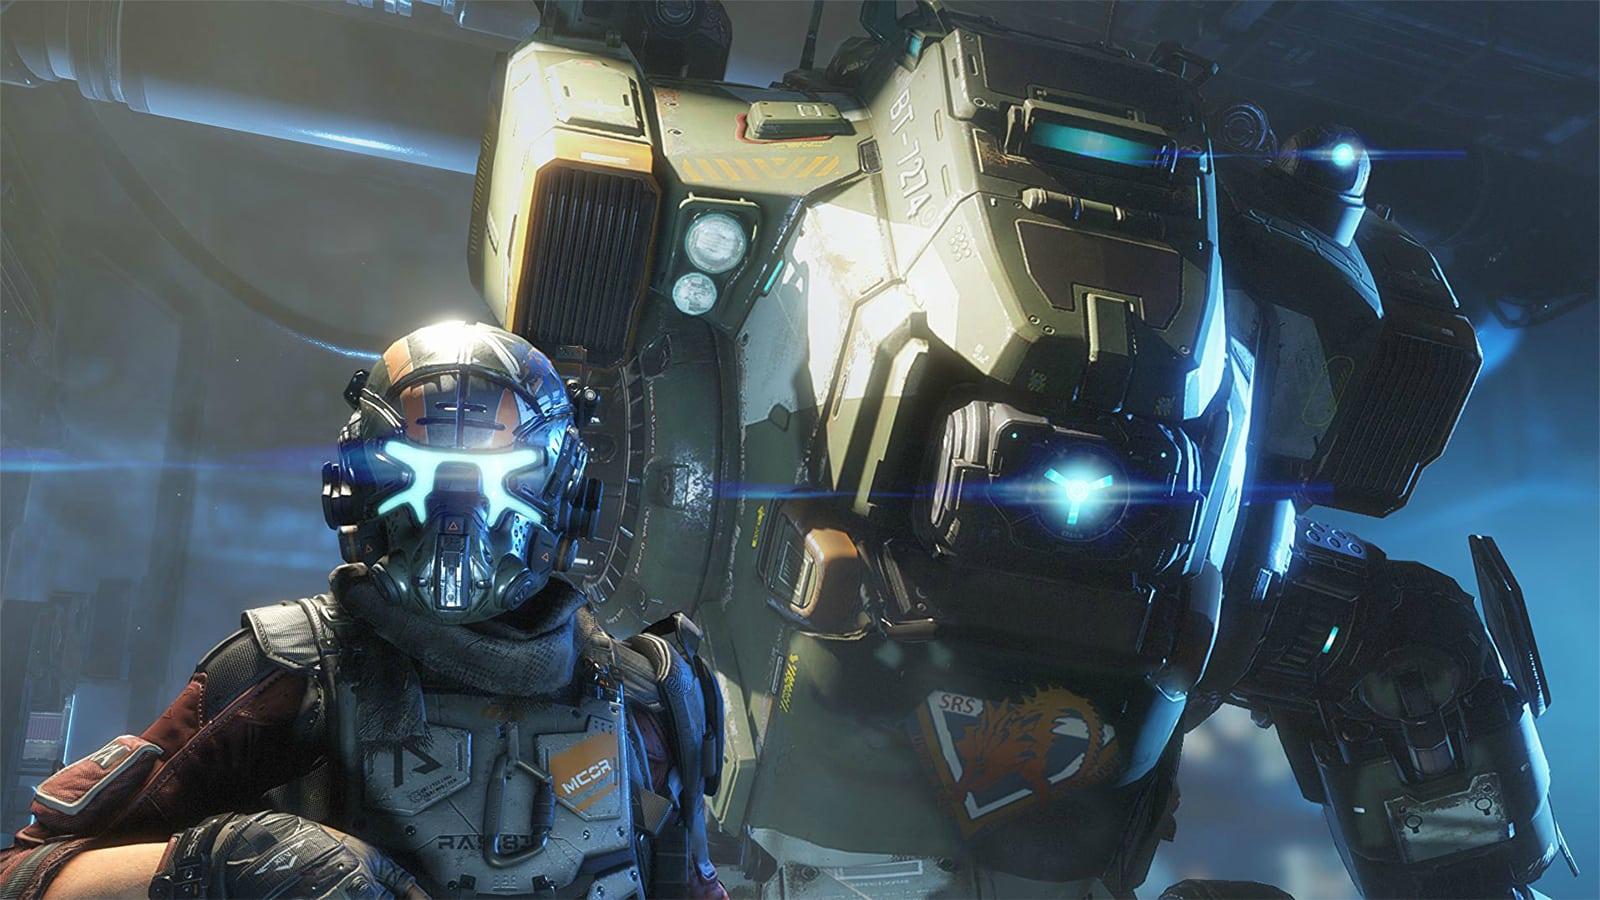 No cross-platform play planned for Titanfall 2